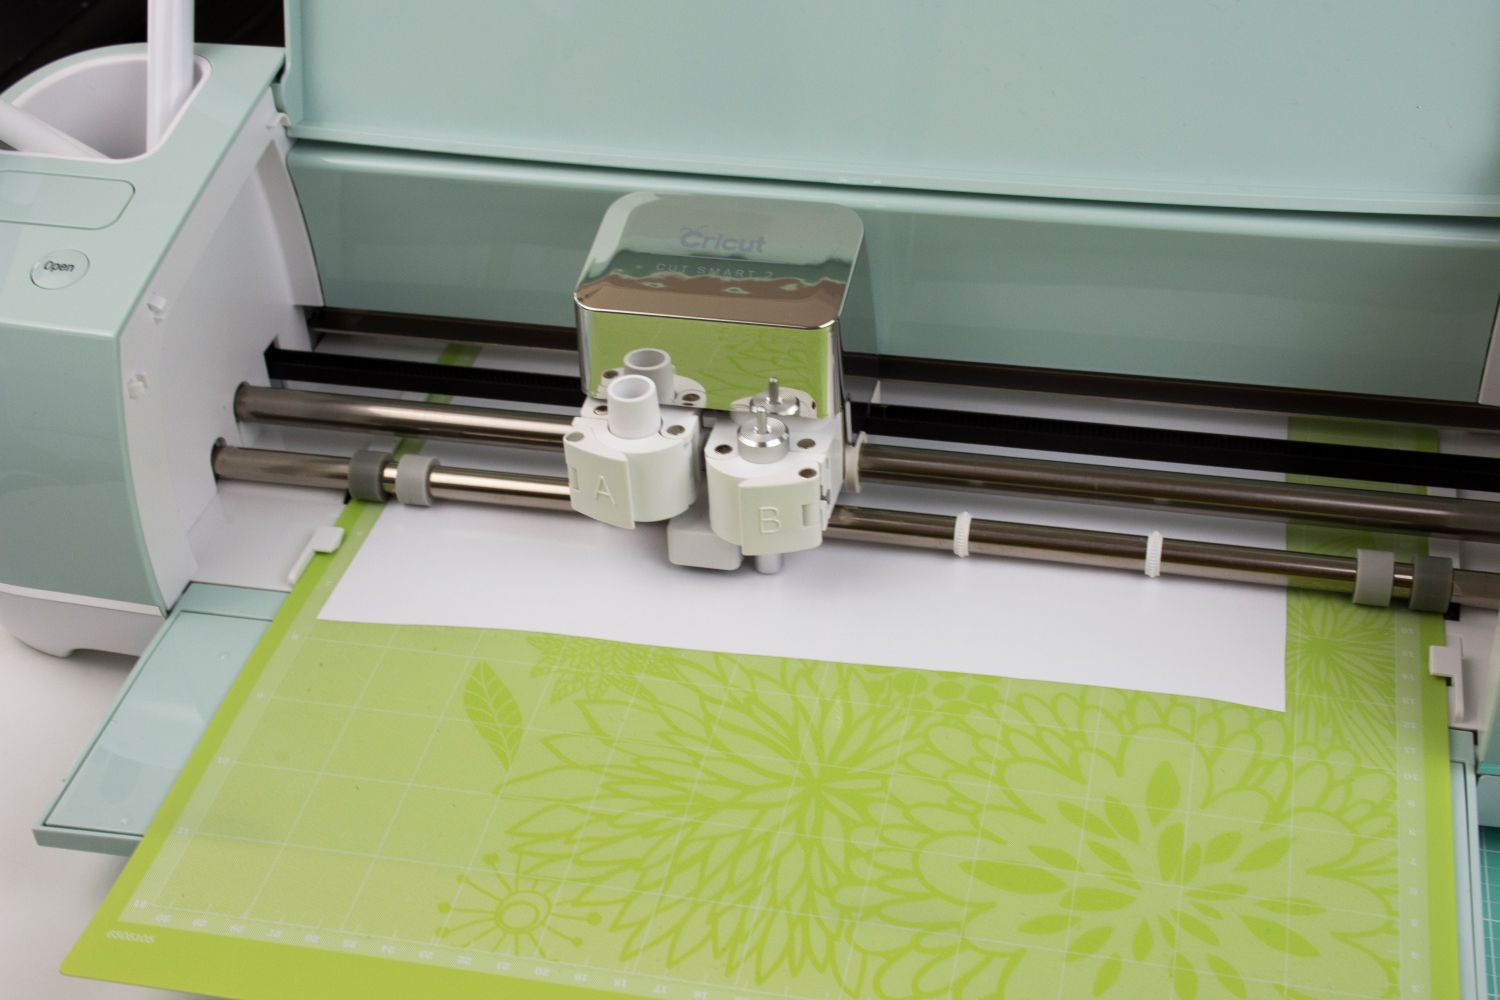 How to Use Iron-On Vinyl with Cricut Explore Air 2